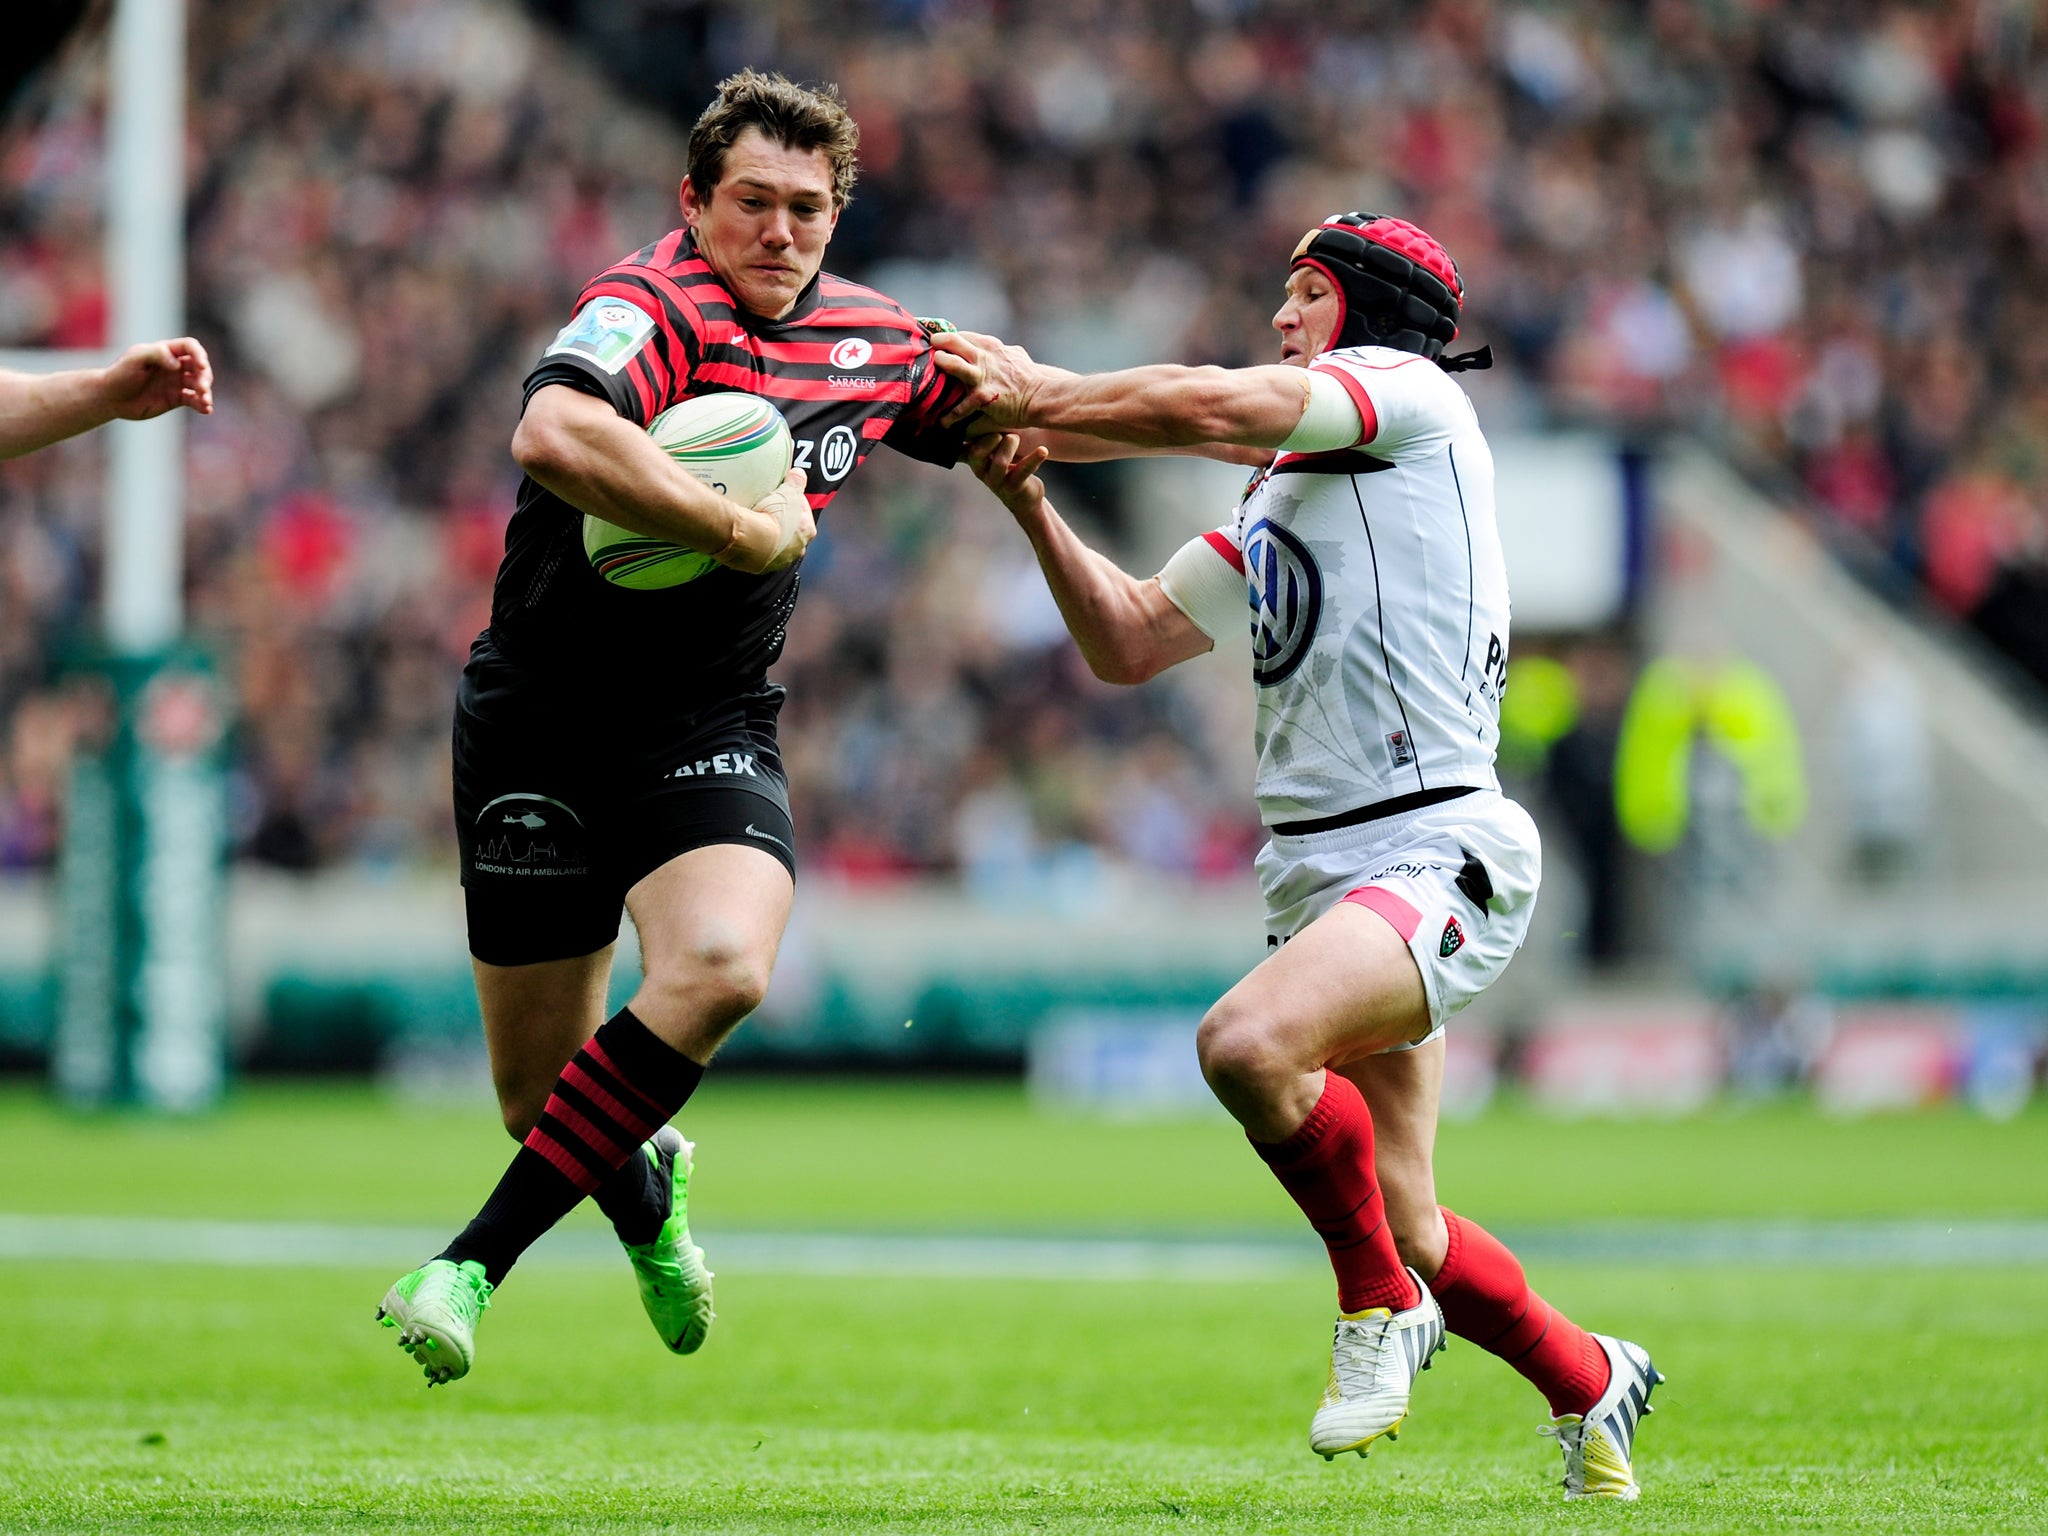 Alex Goode will make his first appearance of the season after recovering from injury